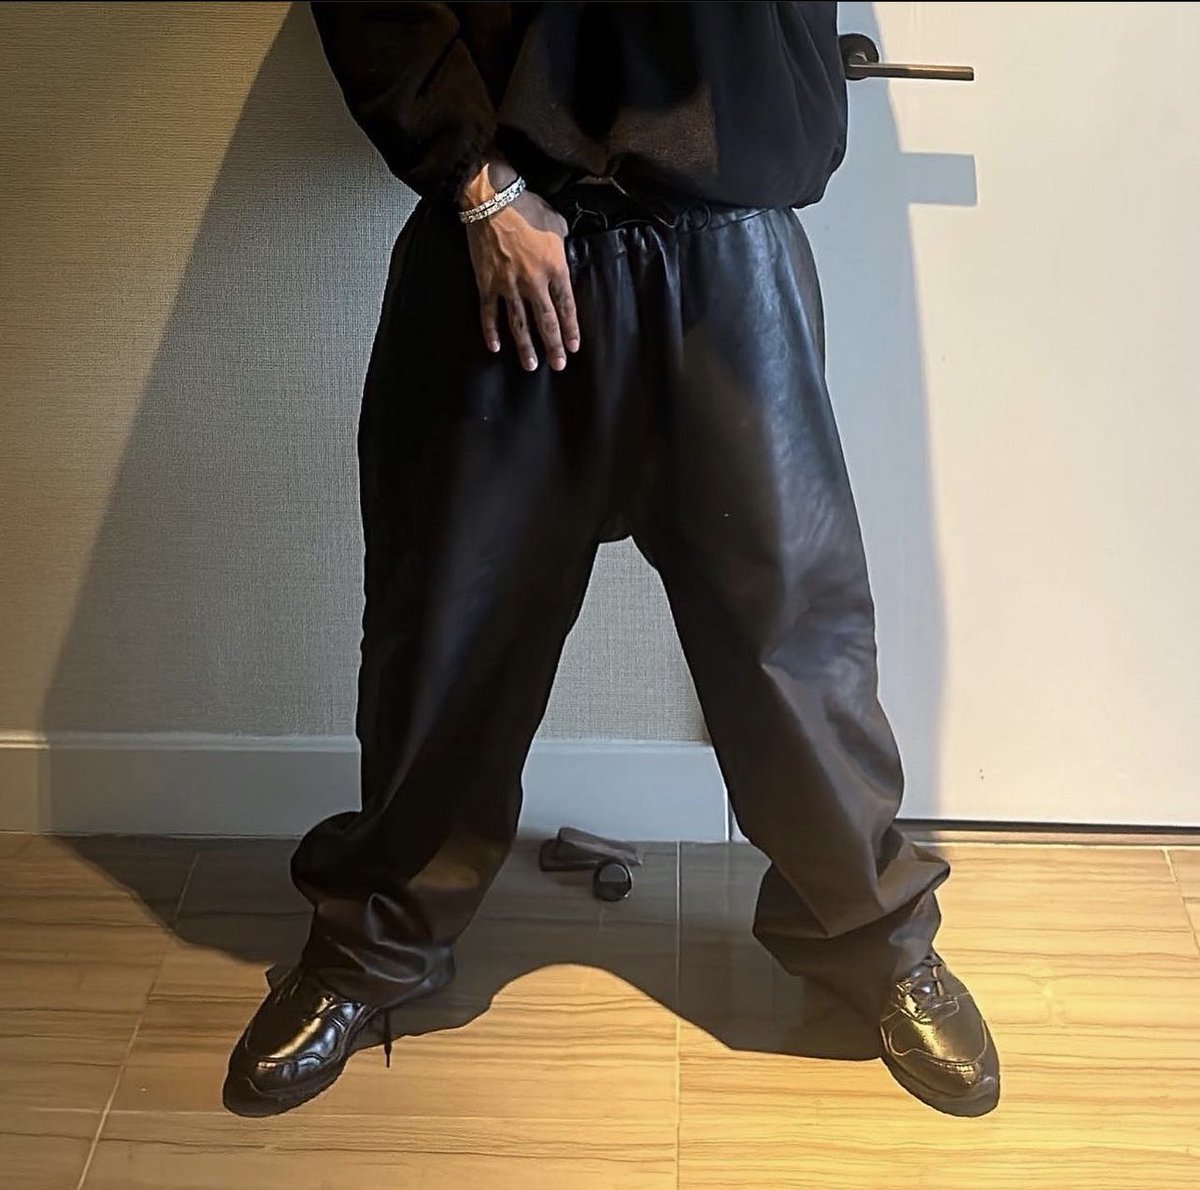 Unreleased YZY Leather pants